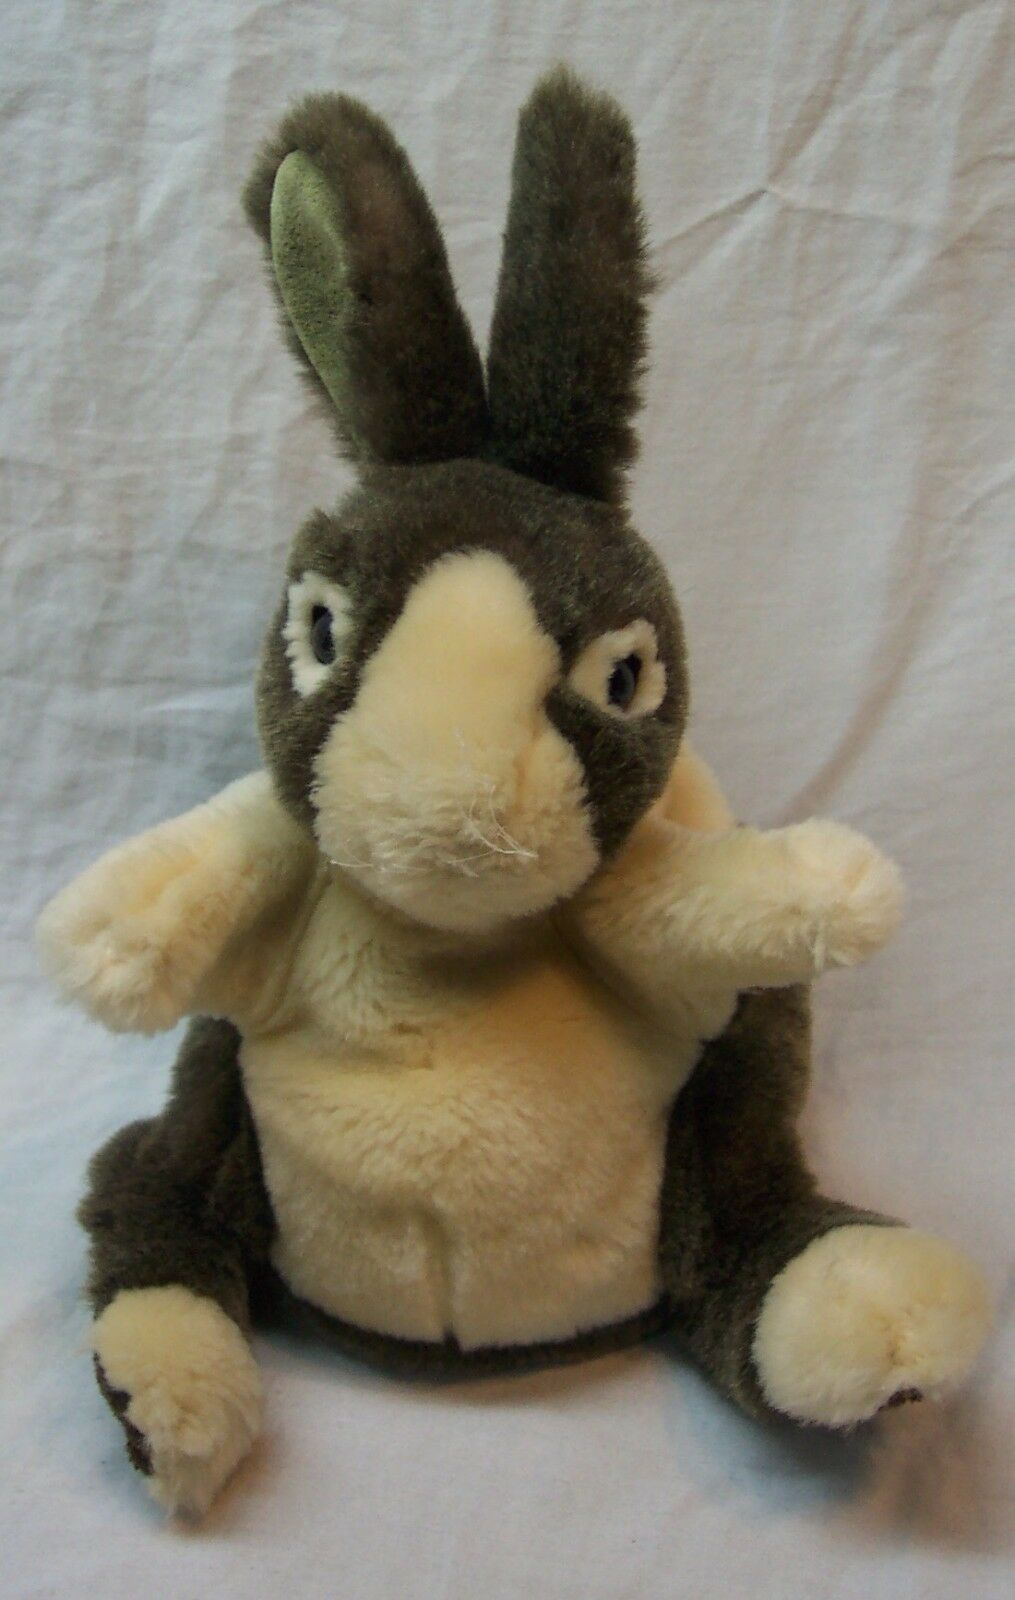 Primary image for Folkmanis WHITE AND GRAY BUNNY RABBIT HAND PUPPET 9" Plush STUFFED ANIMAL Toy